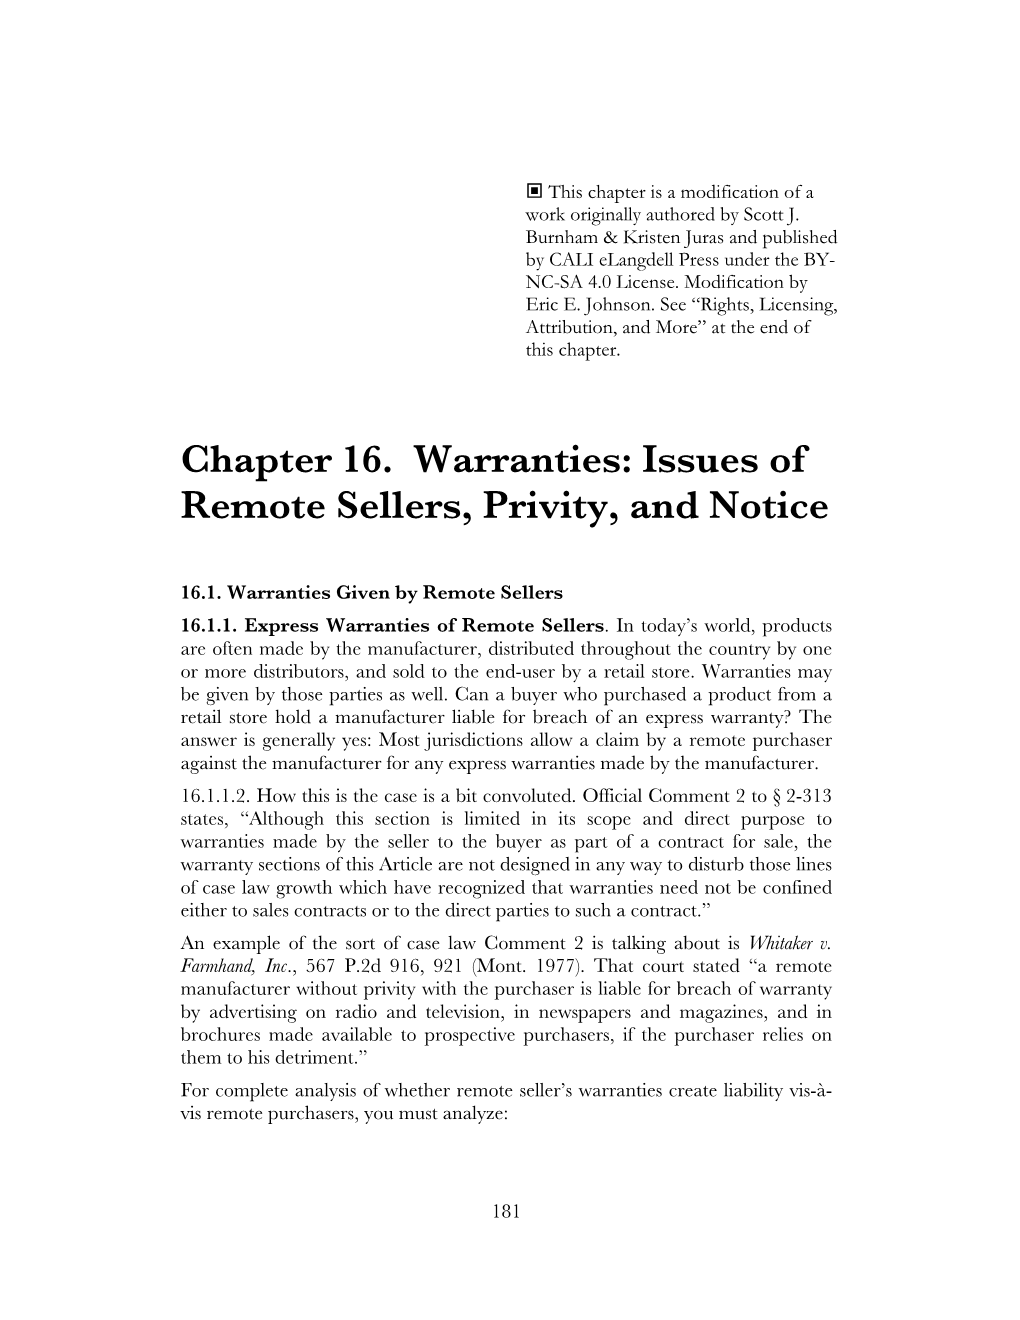 Chapter 16. Warranties: Issues of Remote Sellers, Privity, and Notice